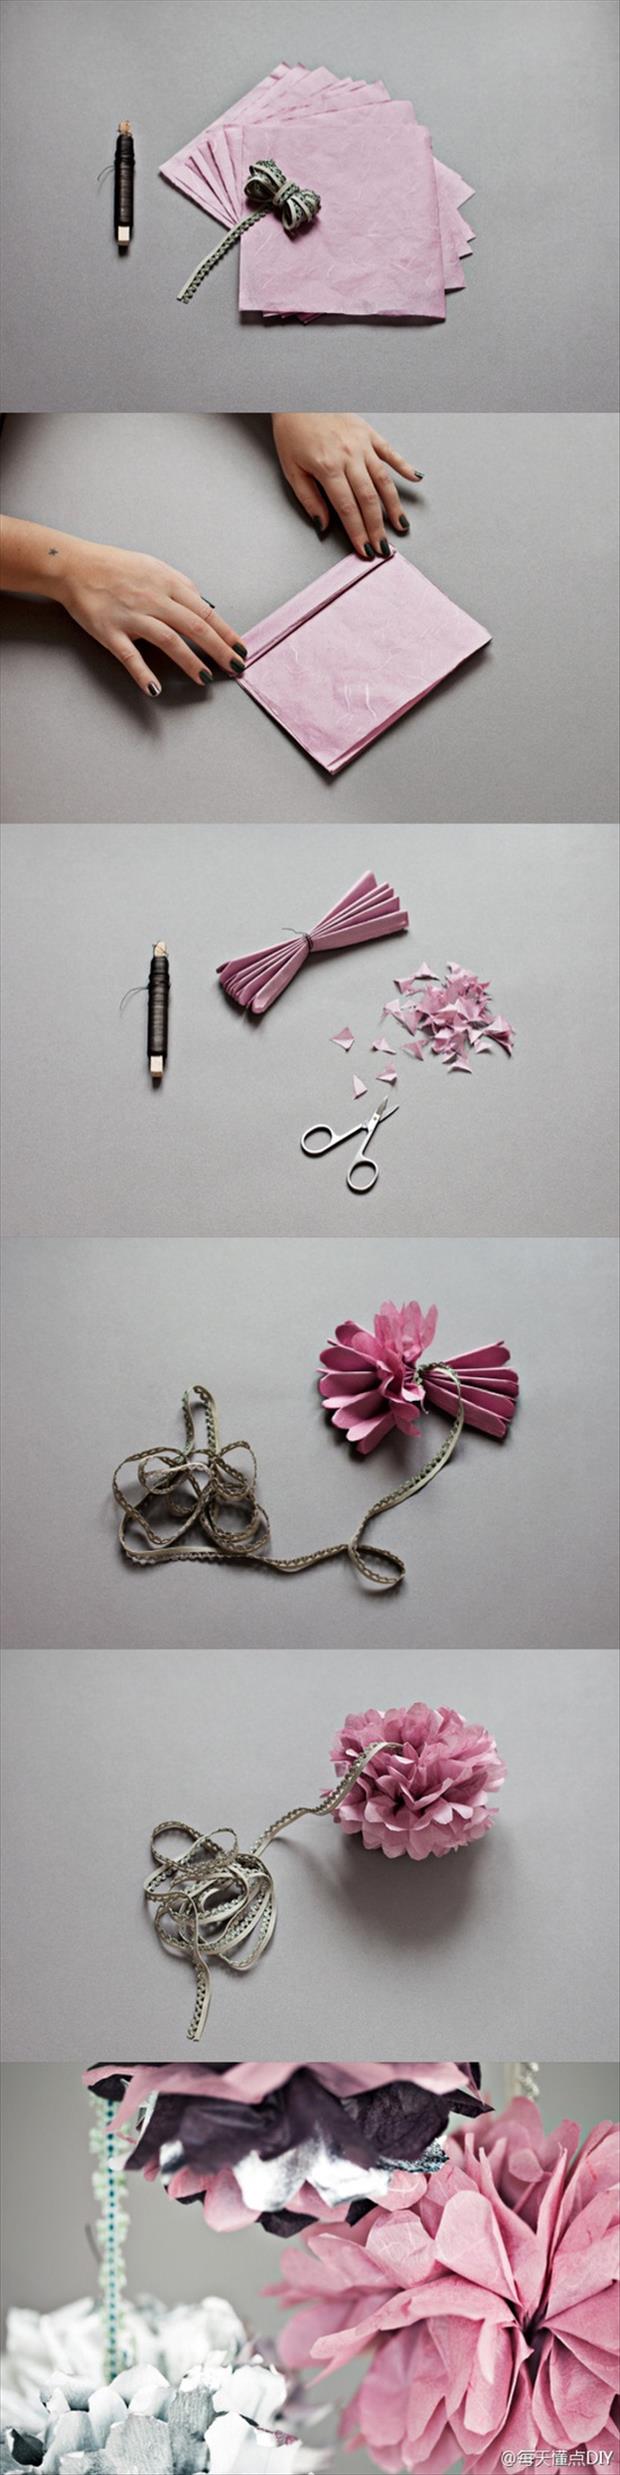 paper napkin flowers - Dump A Day